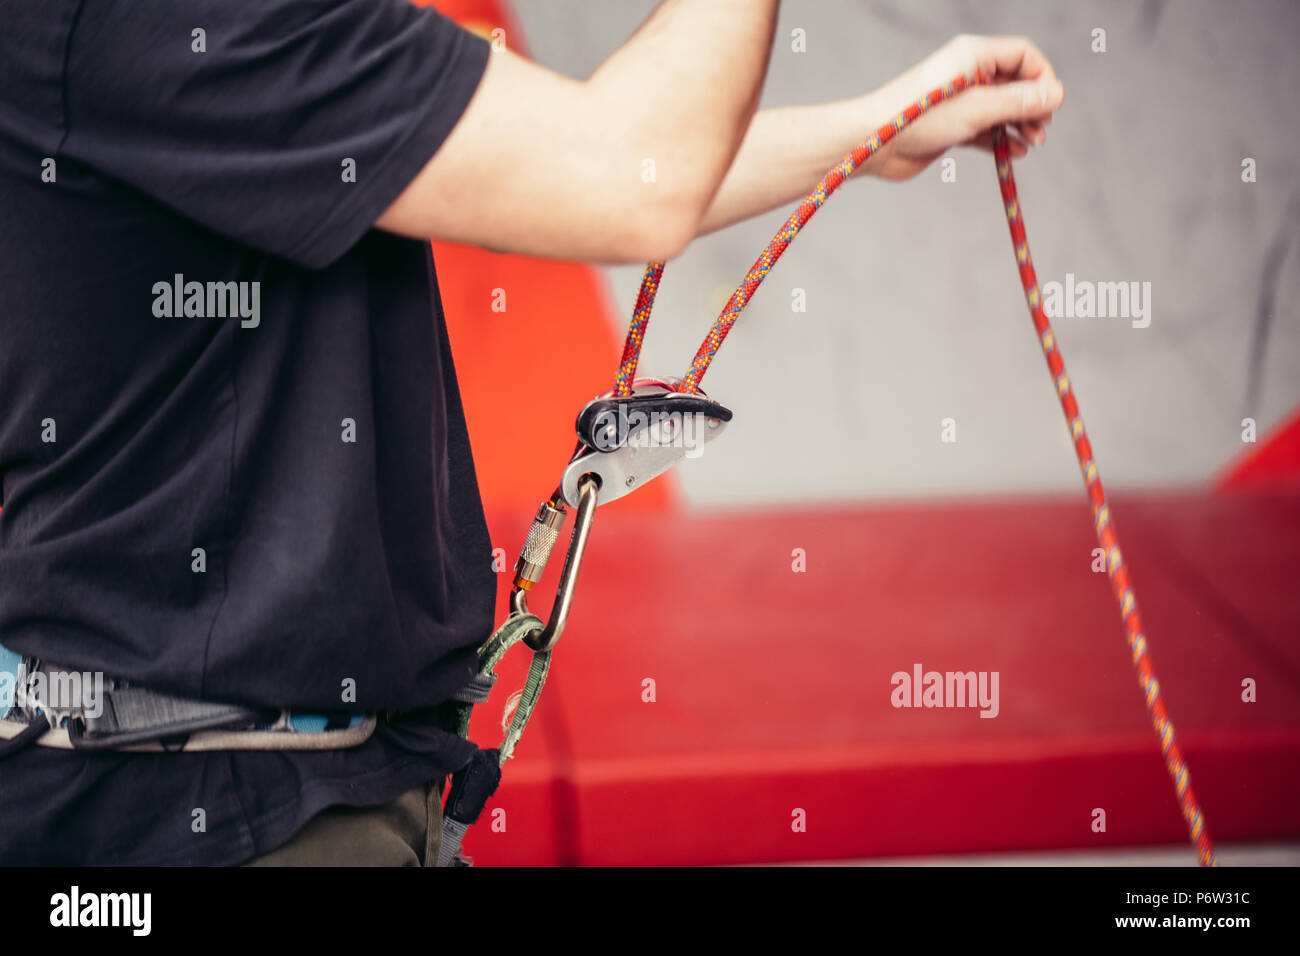 Cropped view of female rock climber wearing safety harness and climbing equipment outdoor, close-up image Stock Photo